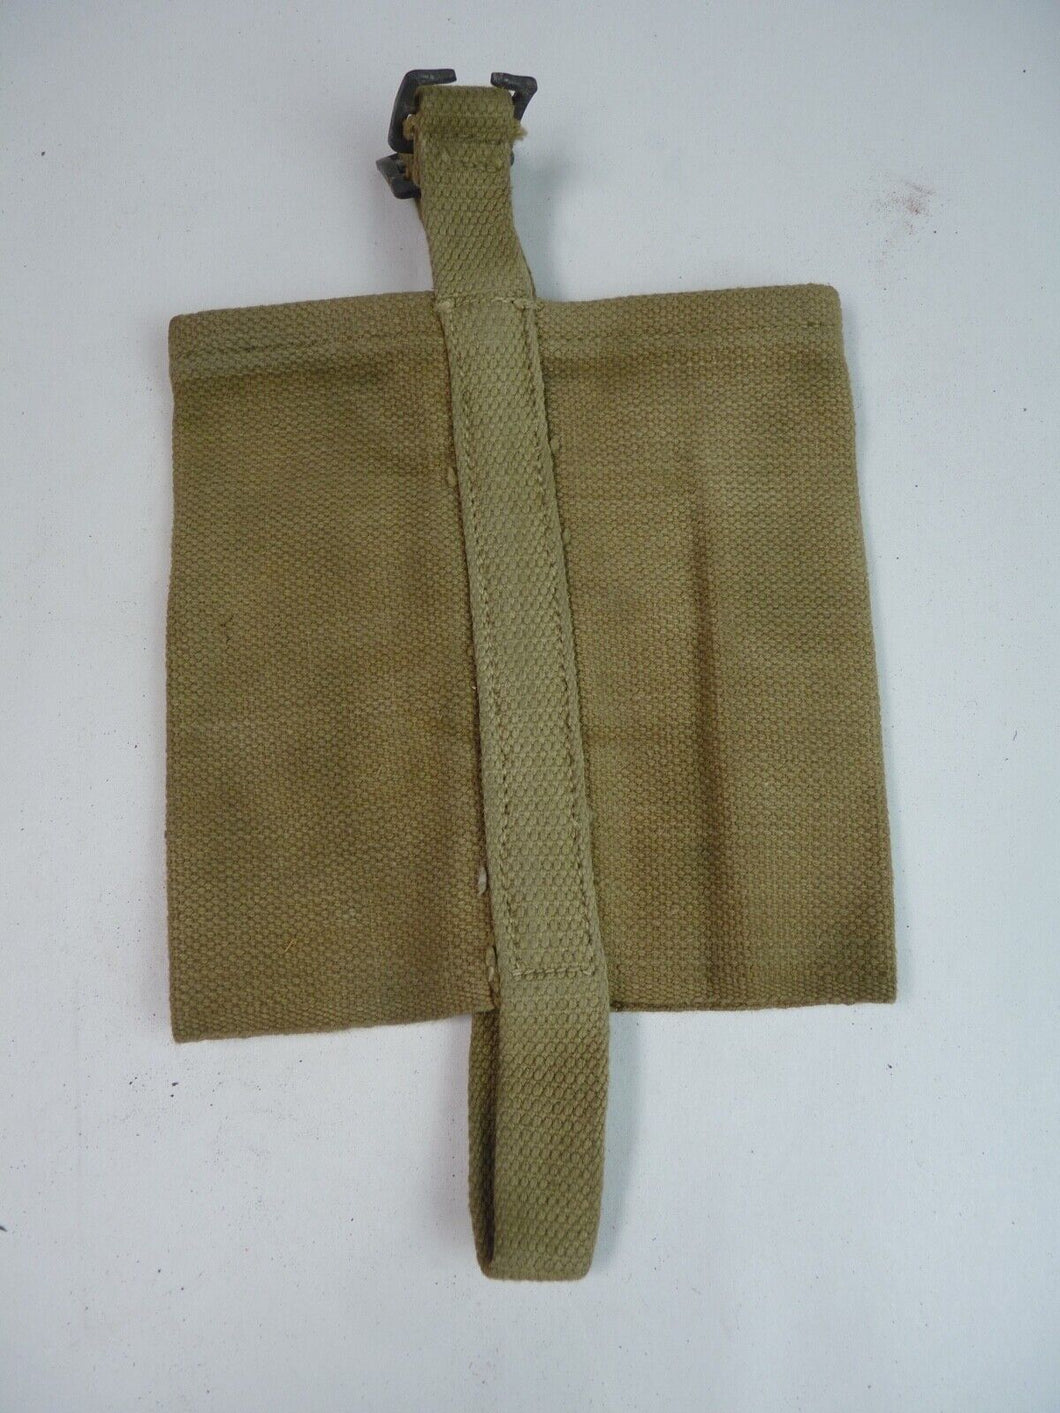 Original WW2 British Army Soldiers Water Bottle Carrier Harness - Dated 1945